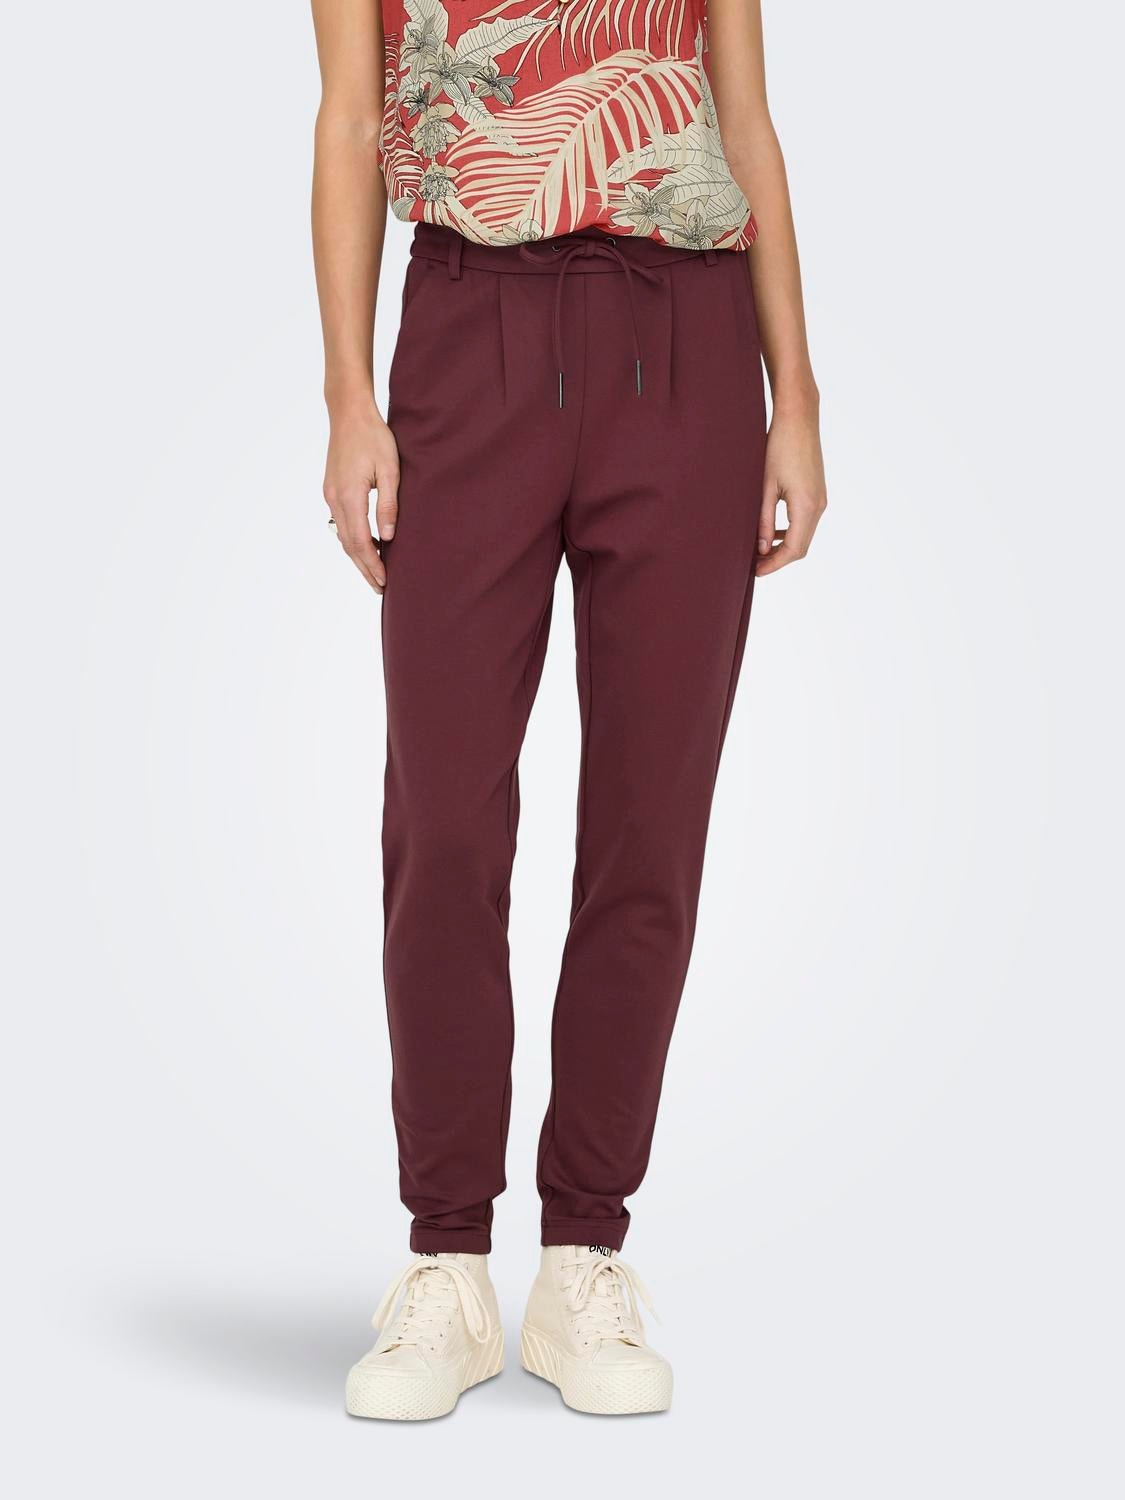 ONLY Poptrash Trousers -Red Mahogany - 15115847